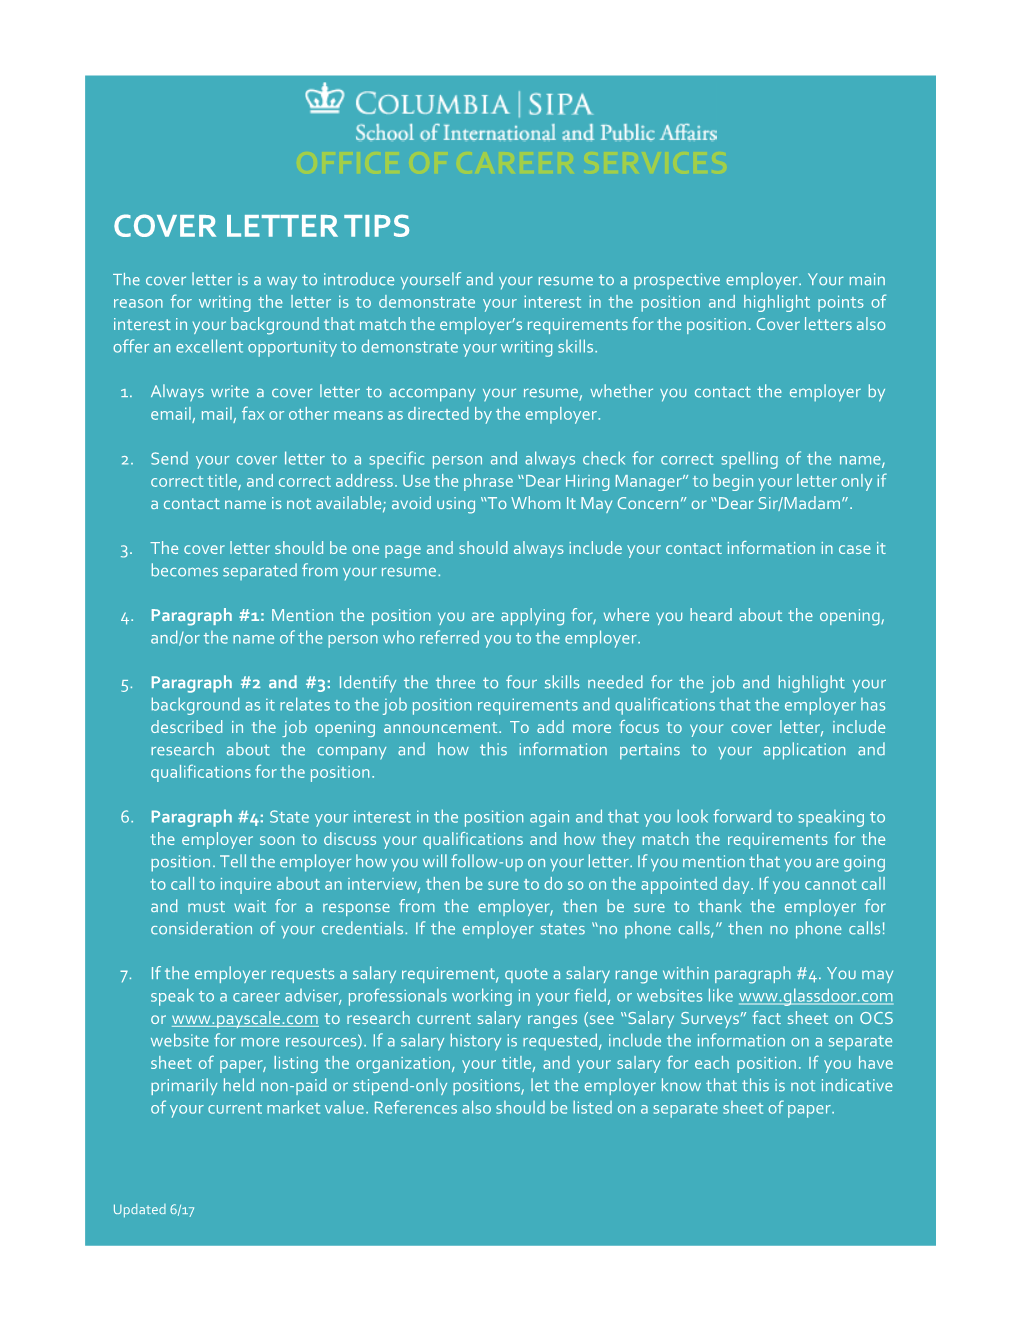 Office of Career Services Cover Letter Tips